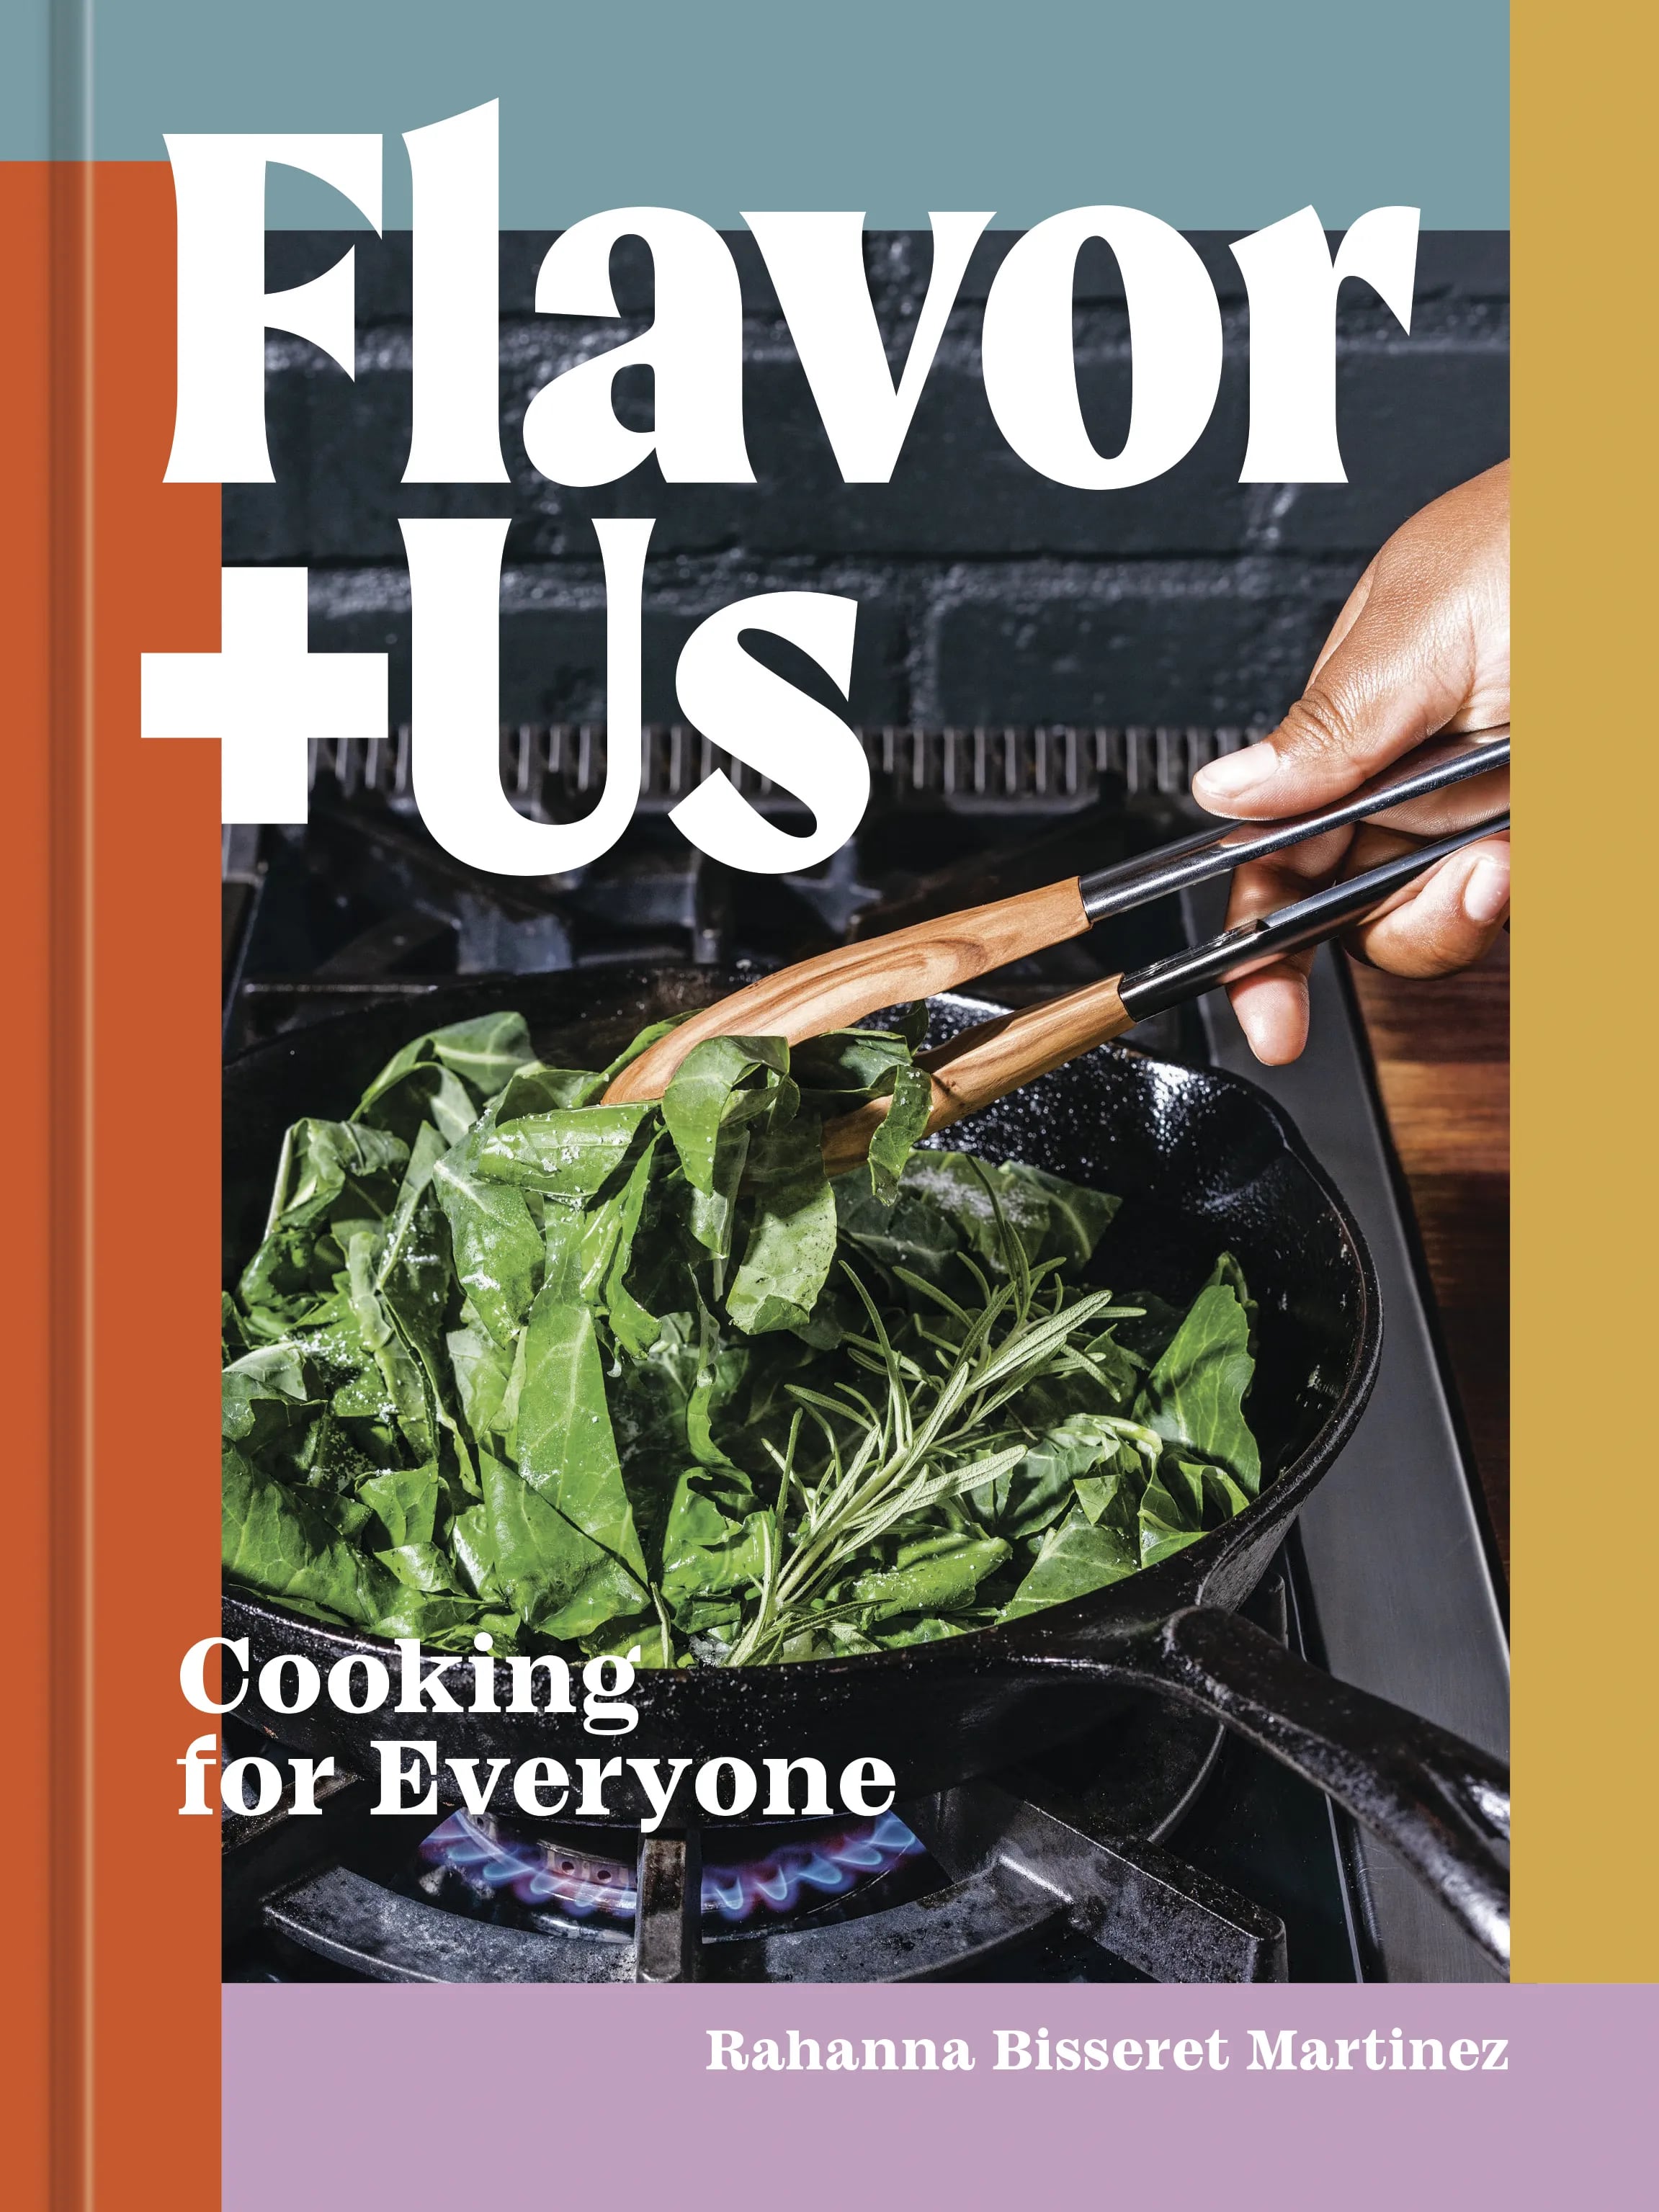 "Flavor+Us: Cooking for Everyone" by Rahanna Bisseret Martinez.